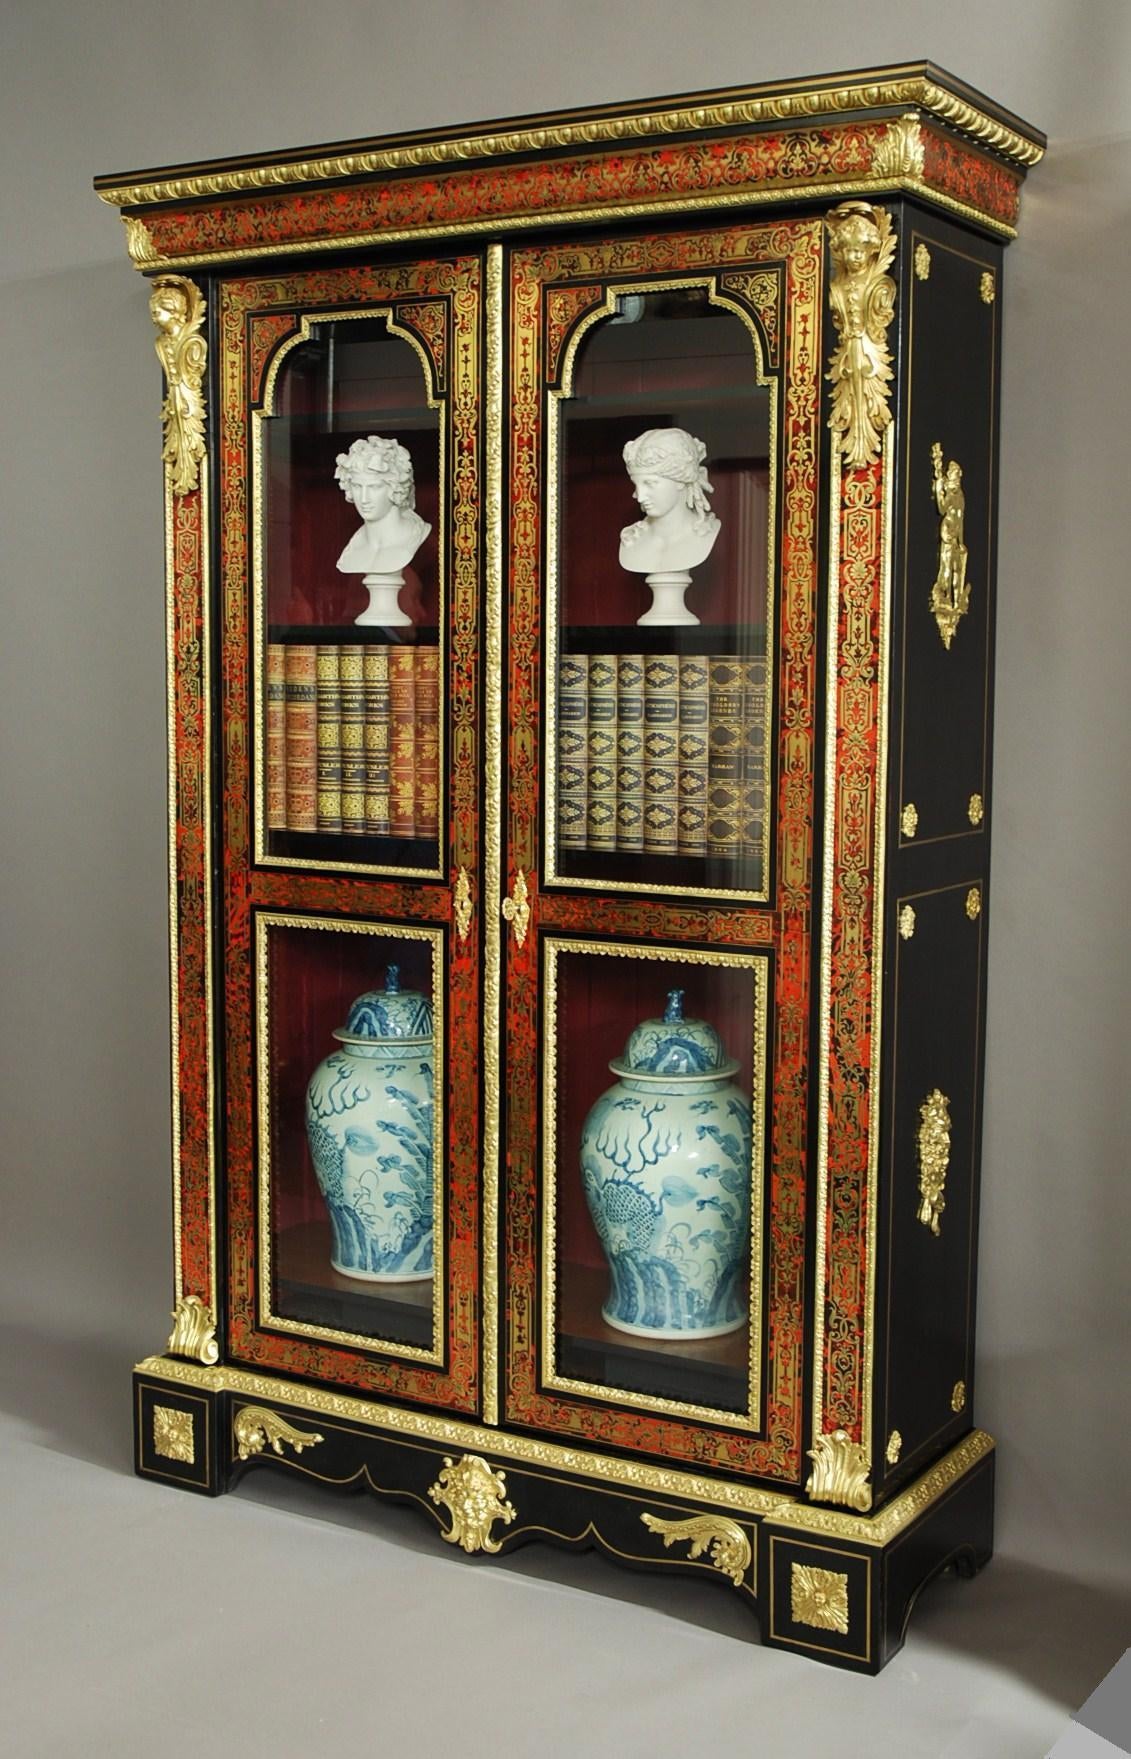 A mid-19th century superb quality French Napoleon III gilt bronze-mounted boulle marquetry bibliotheque (bookcase) in excellent condition.

This piece consists of a wooden top with brass stringing and fine quality egg and dart ormolu moulding with